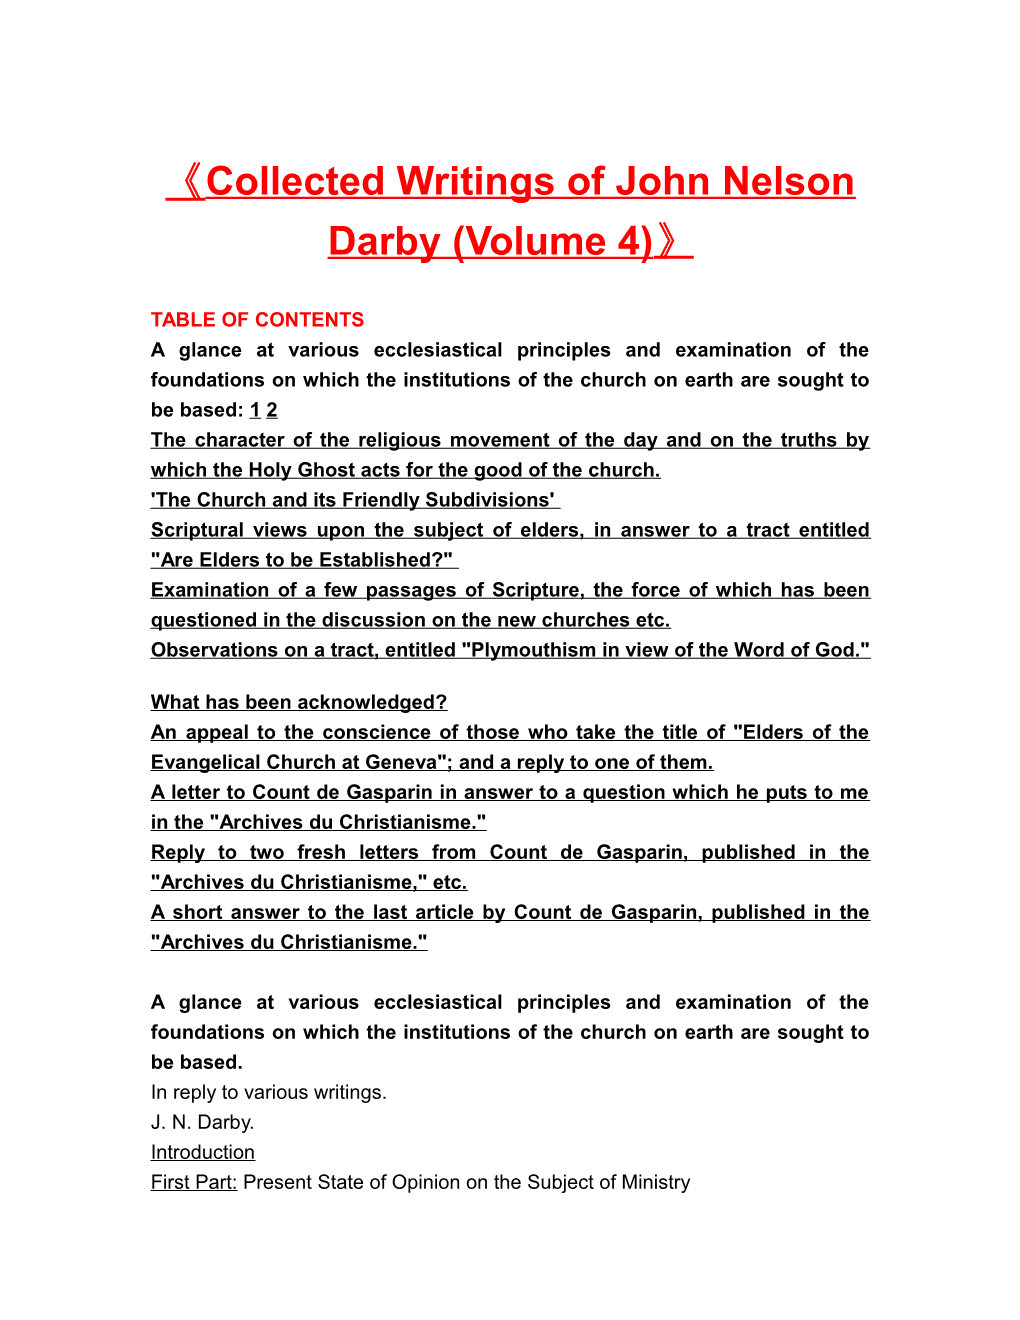 Collected Writings of John Nelson Darby (Volume 4)